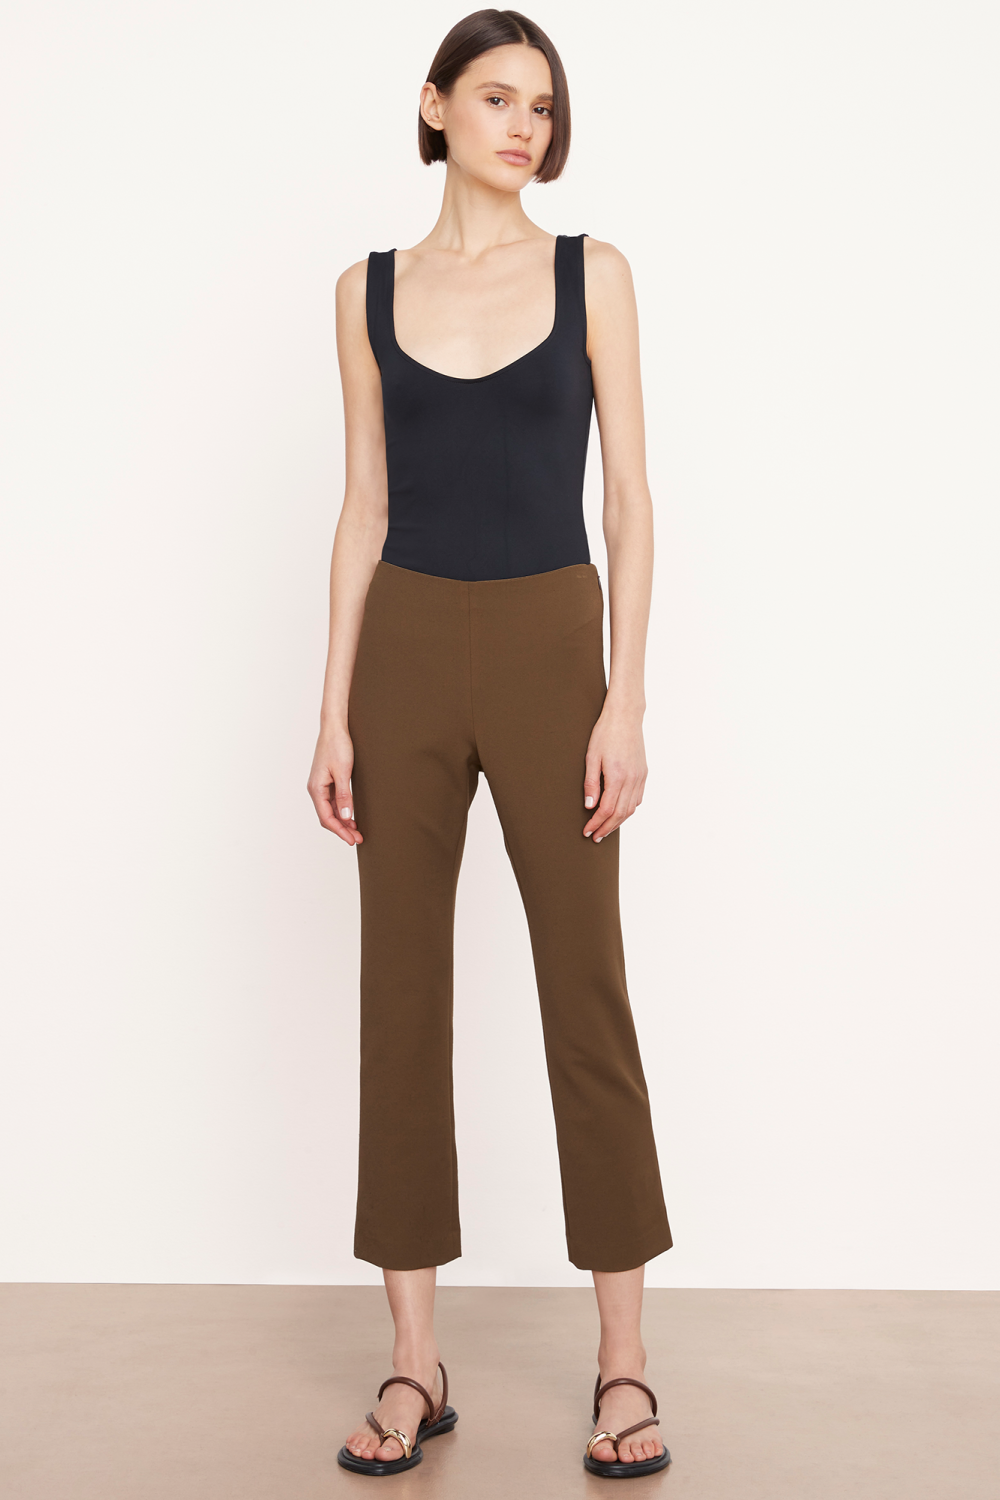 This High Waist Crop Flare pant from Vince is crafted from Italian stretch cotton for a tailored fit and stylish flare at the knee